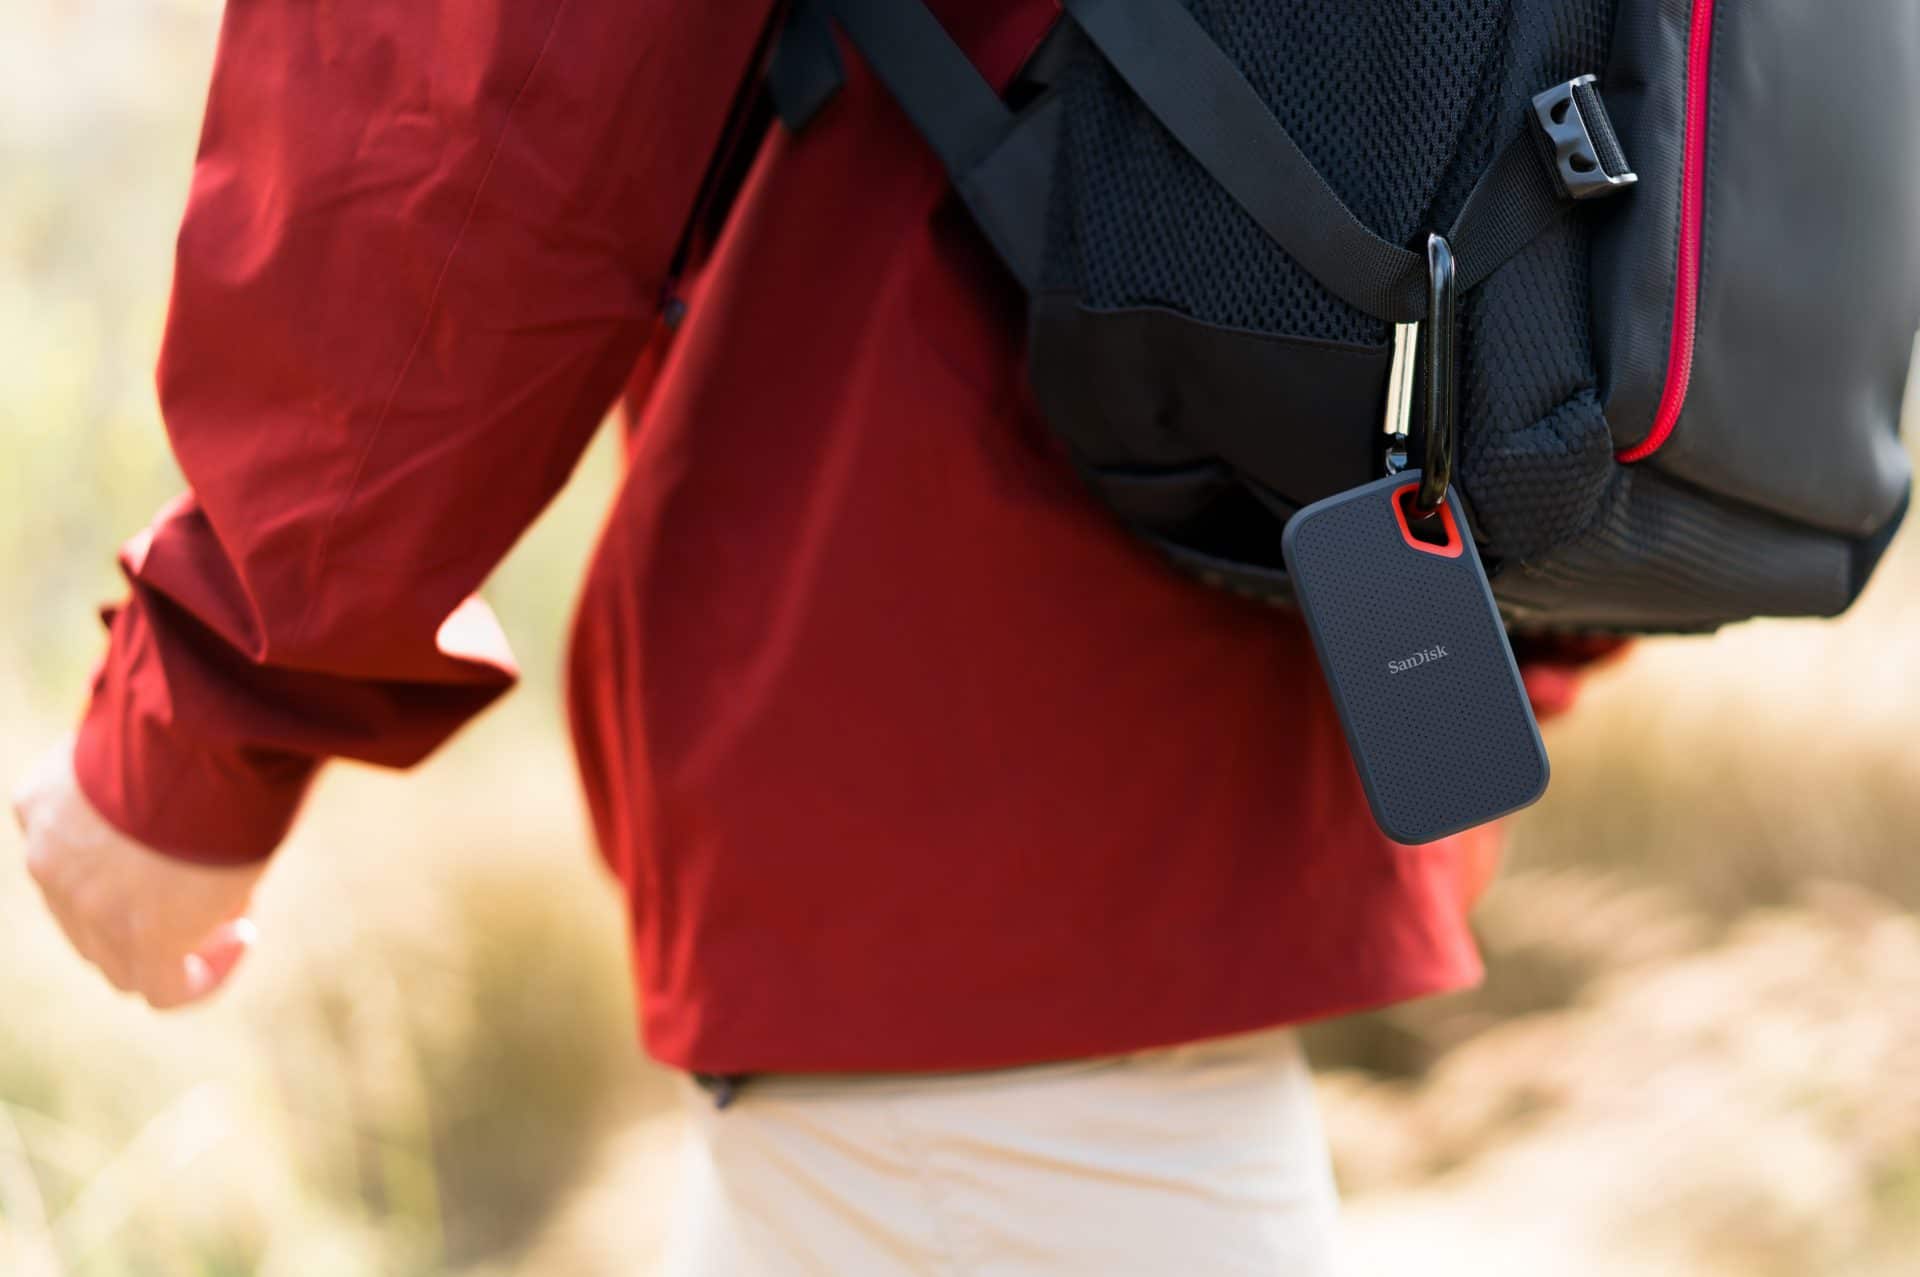 Sandisk Extreme Storage Clipped to Backpack